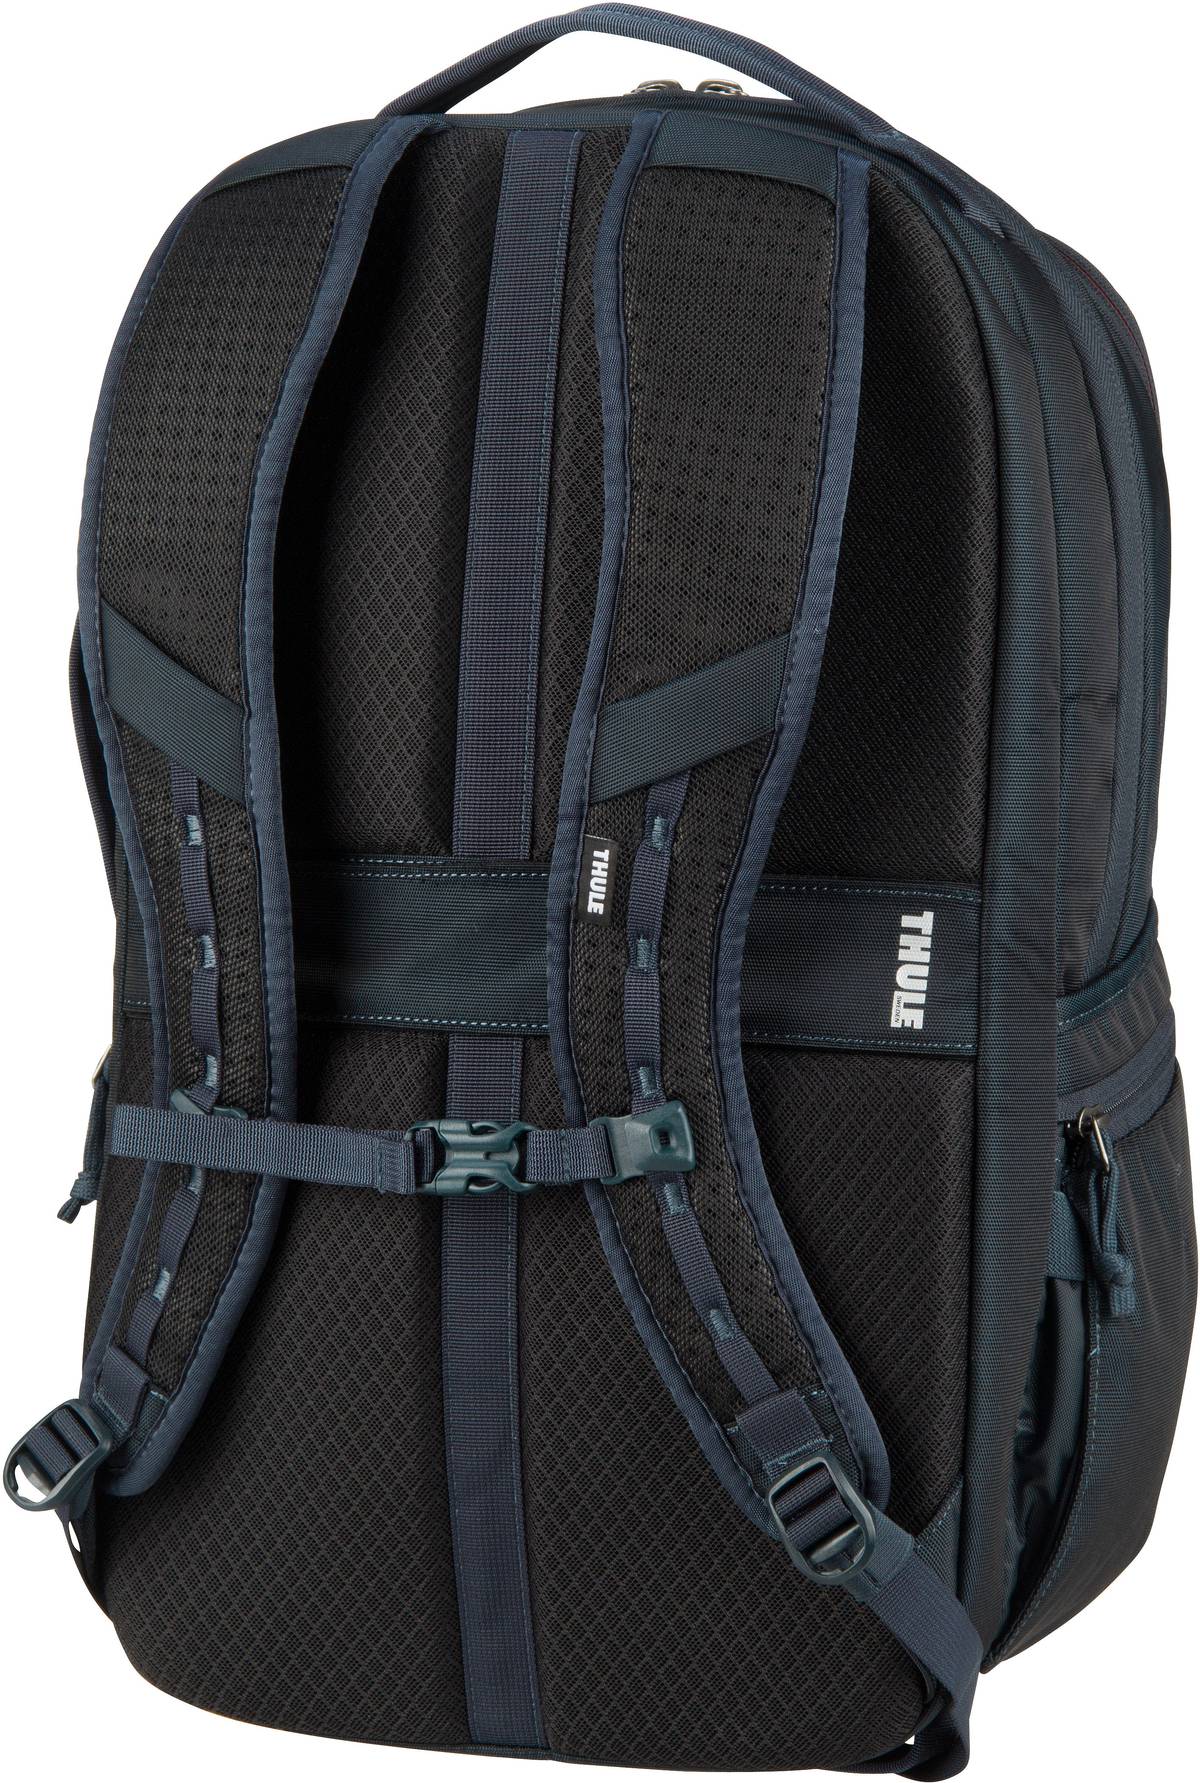 Thule Subterra Backpack 30L - Mineral